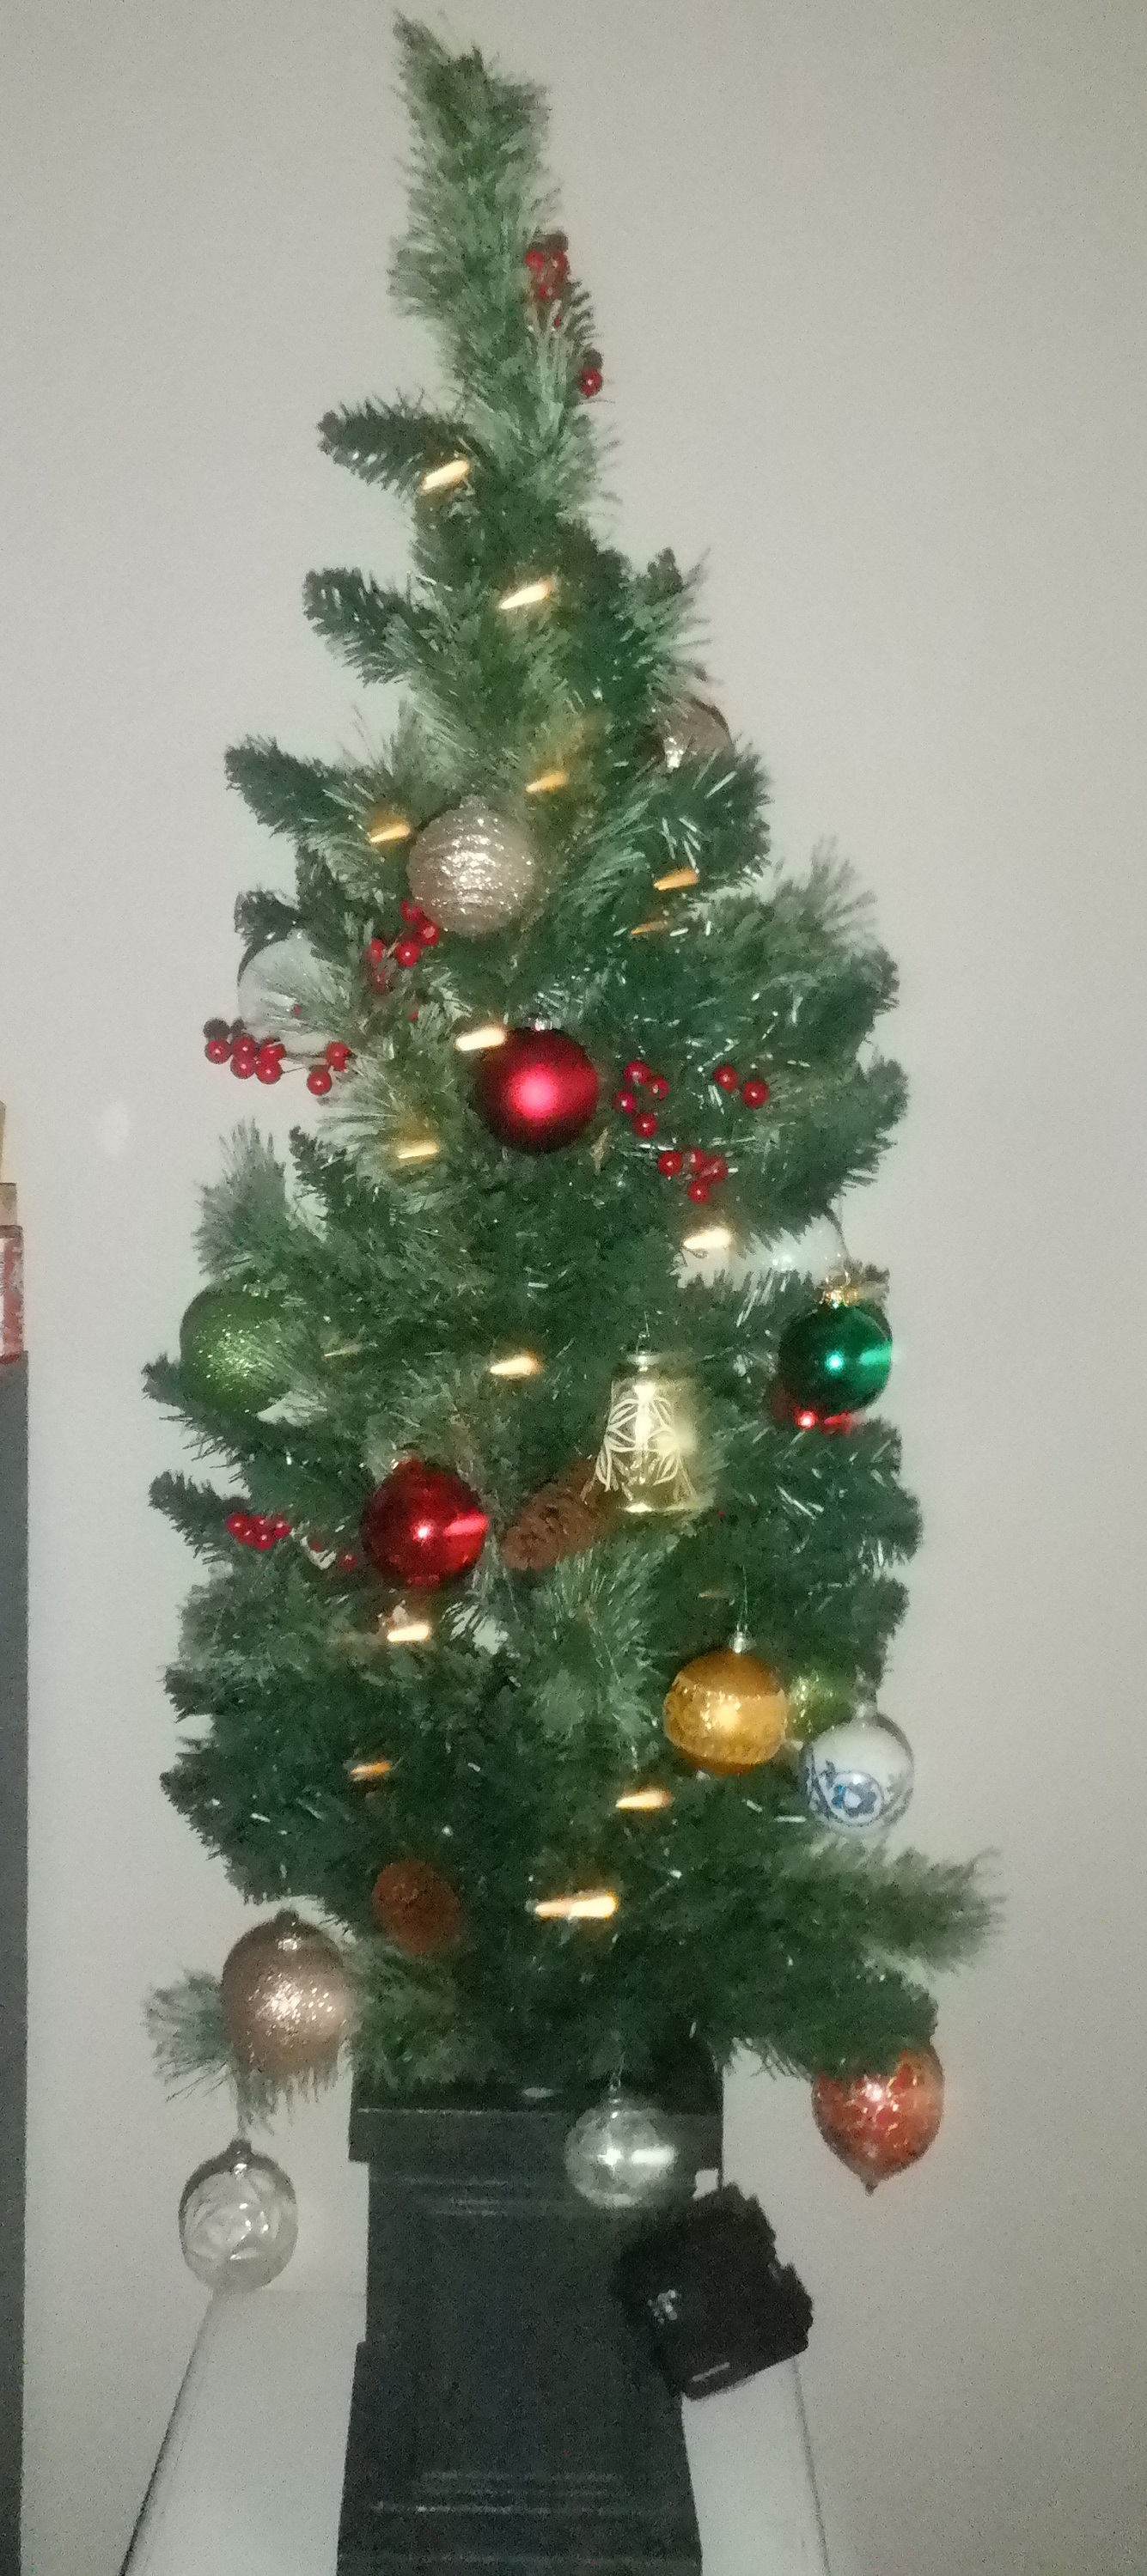 Photo I took of the tree with all the ornaments on